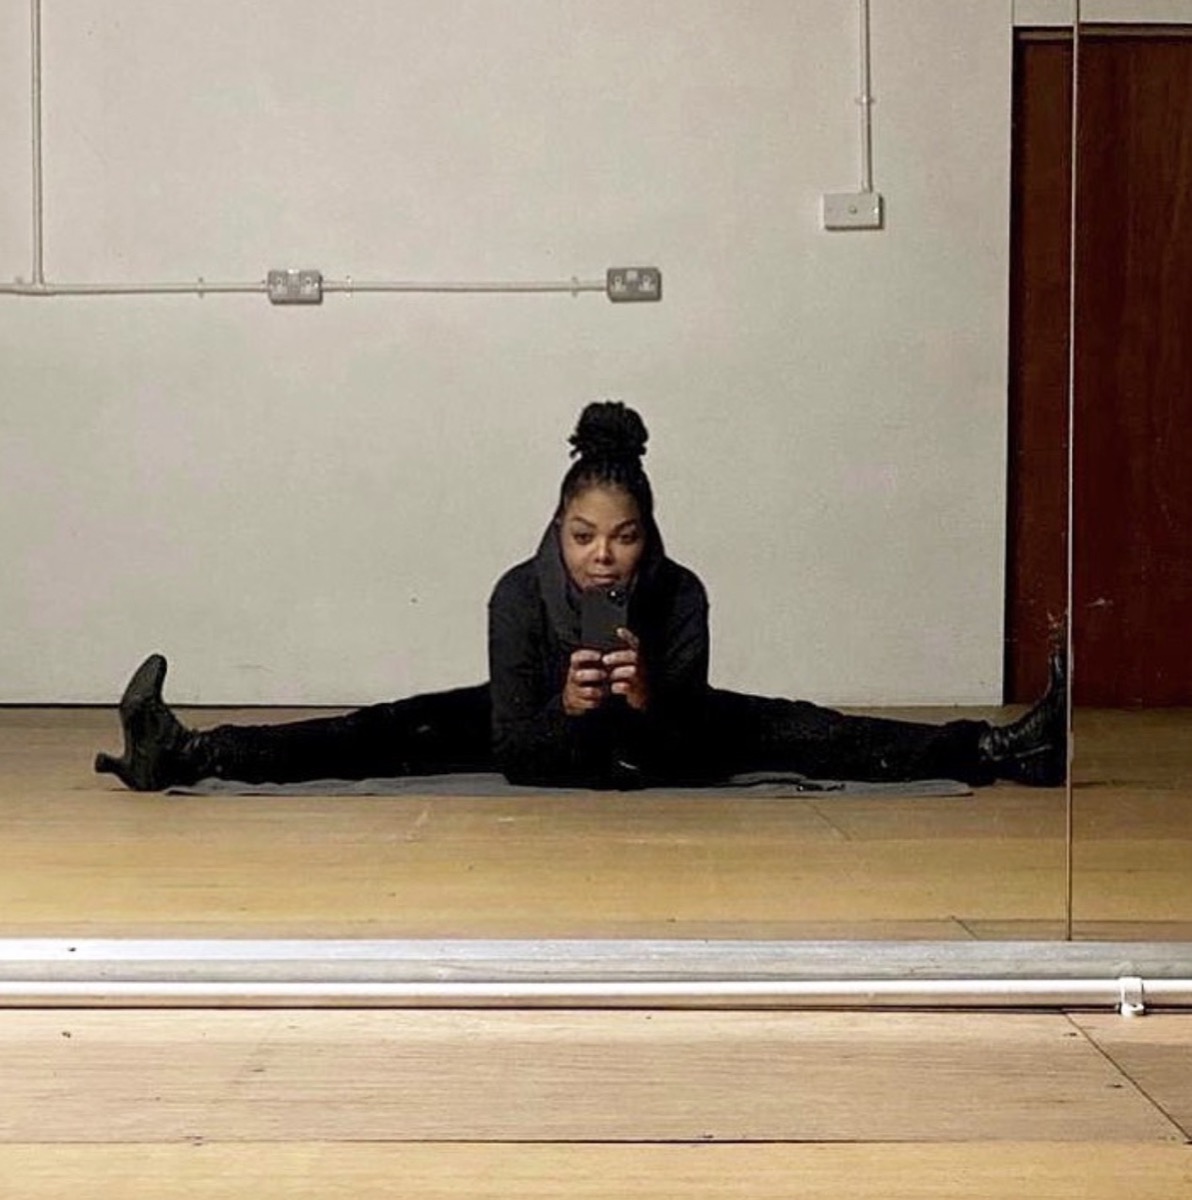 janet jackson doing split in black outfit